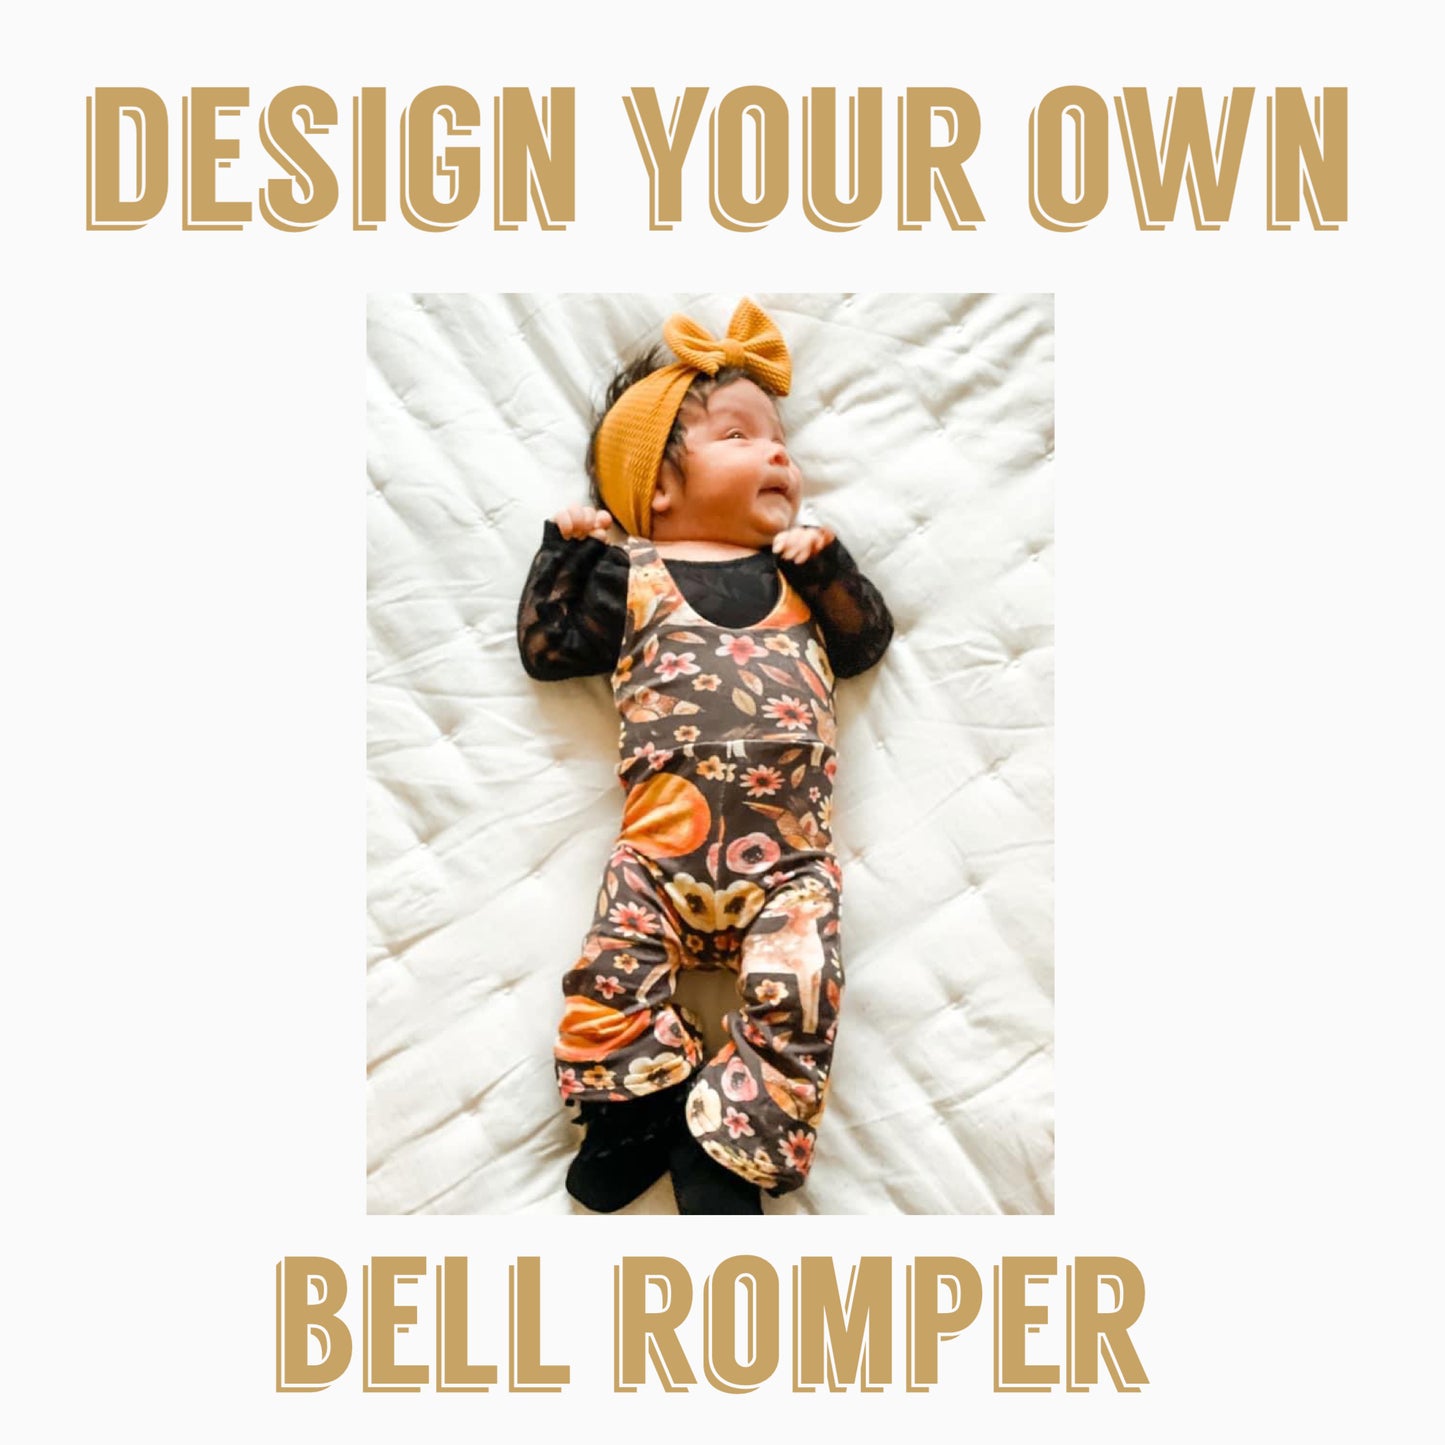 Design Your Own | Bell Romper